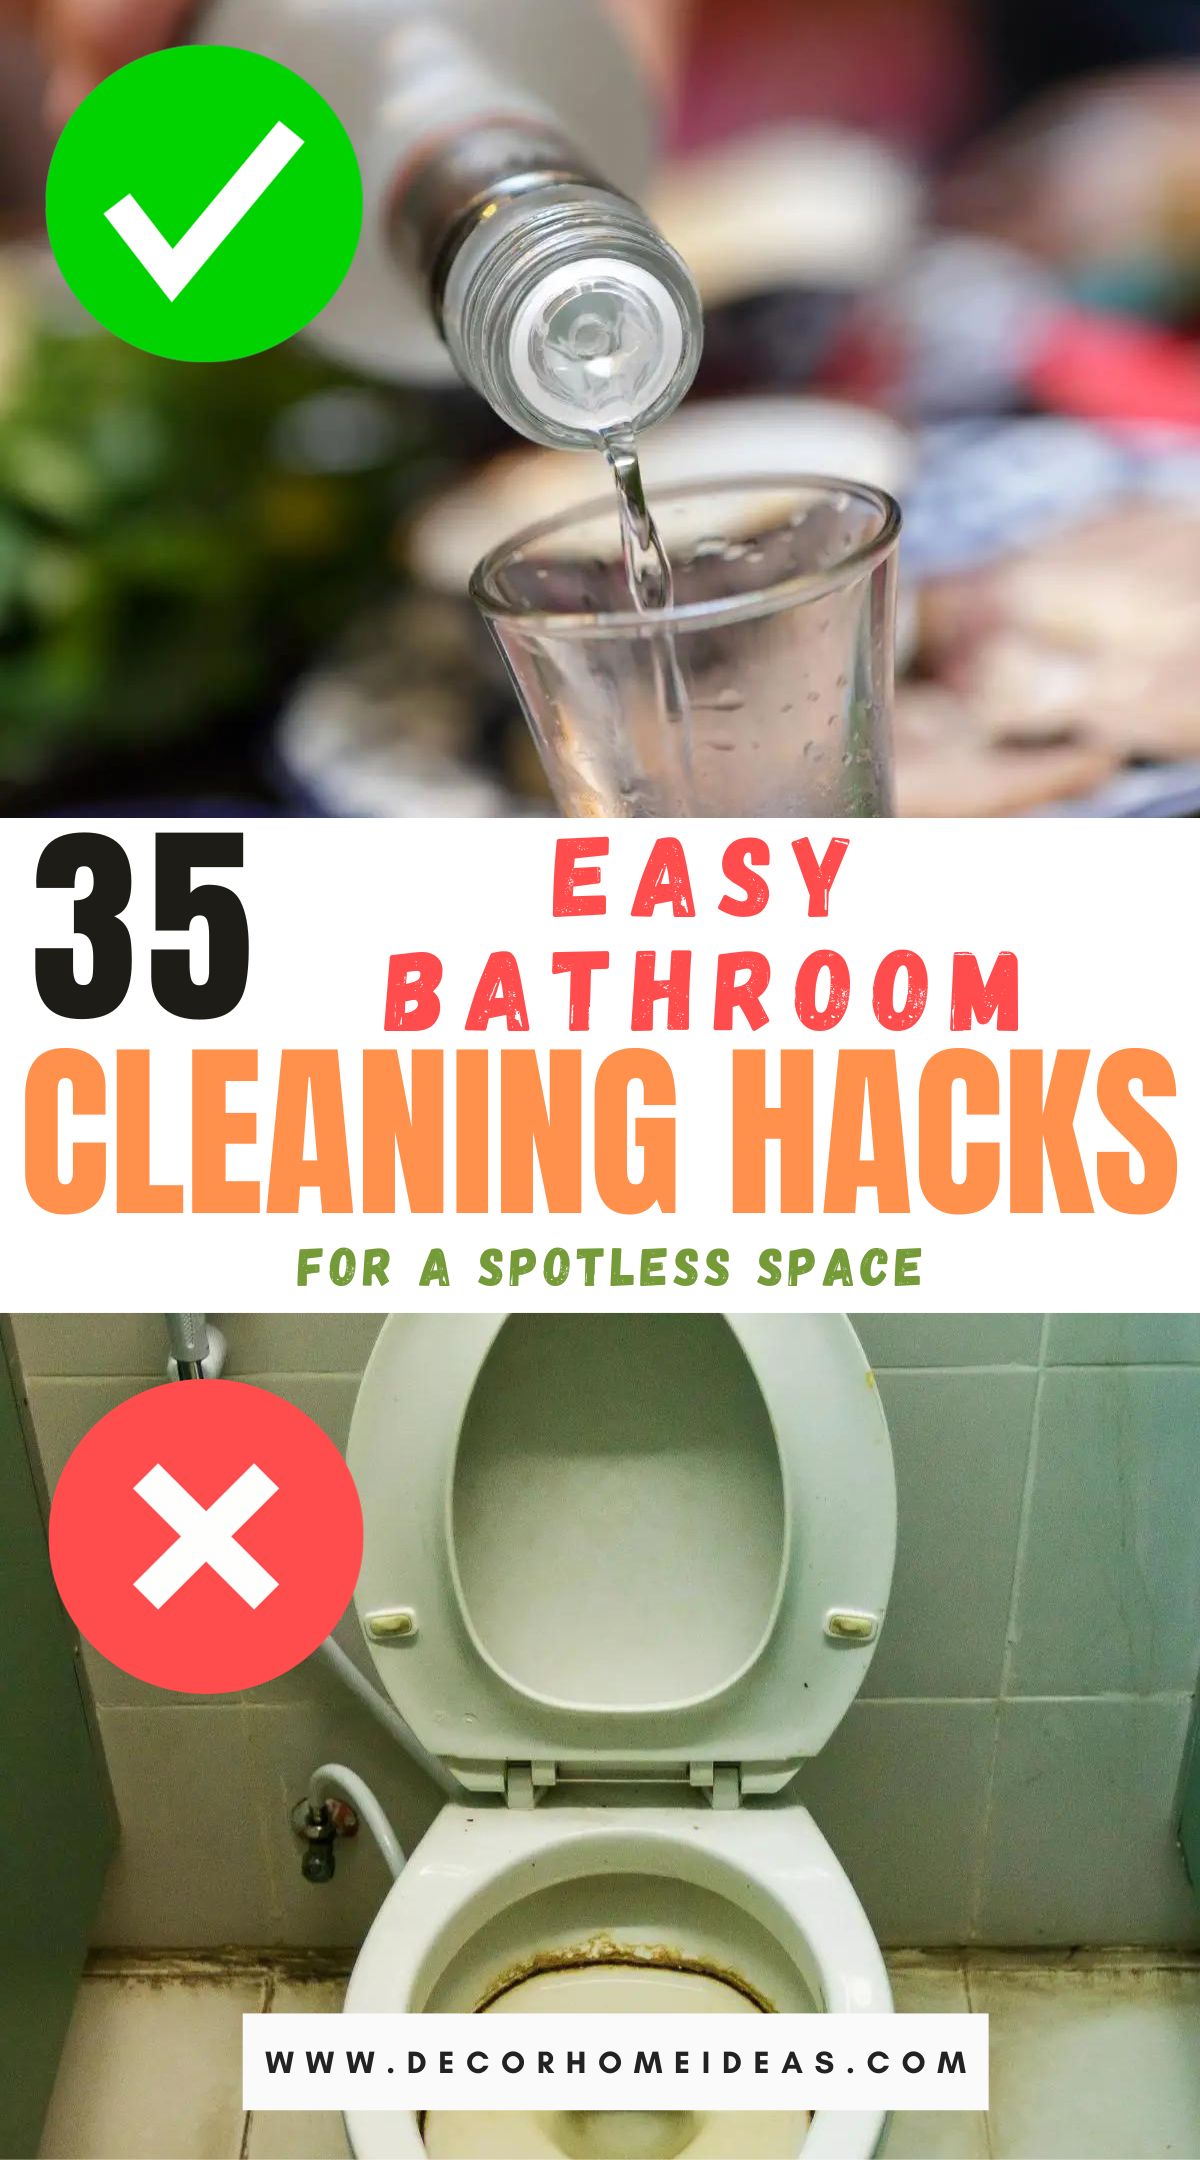 Keep your bathroom spotless effortlessly with these 35 easy cleaning hacks. Discover smart tricks and tips to maintain a pristine and inviting bathroom space.